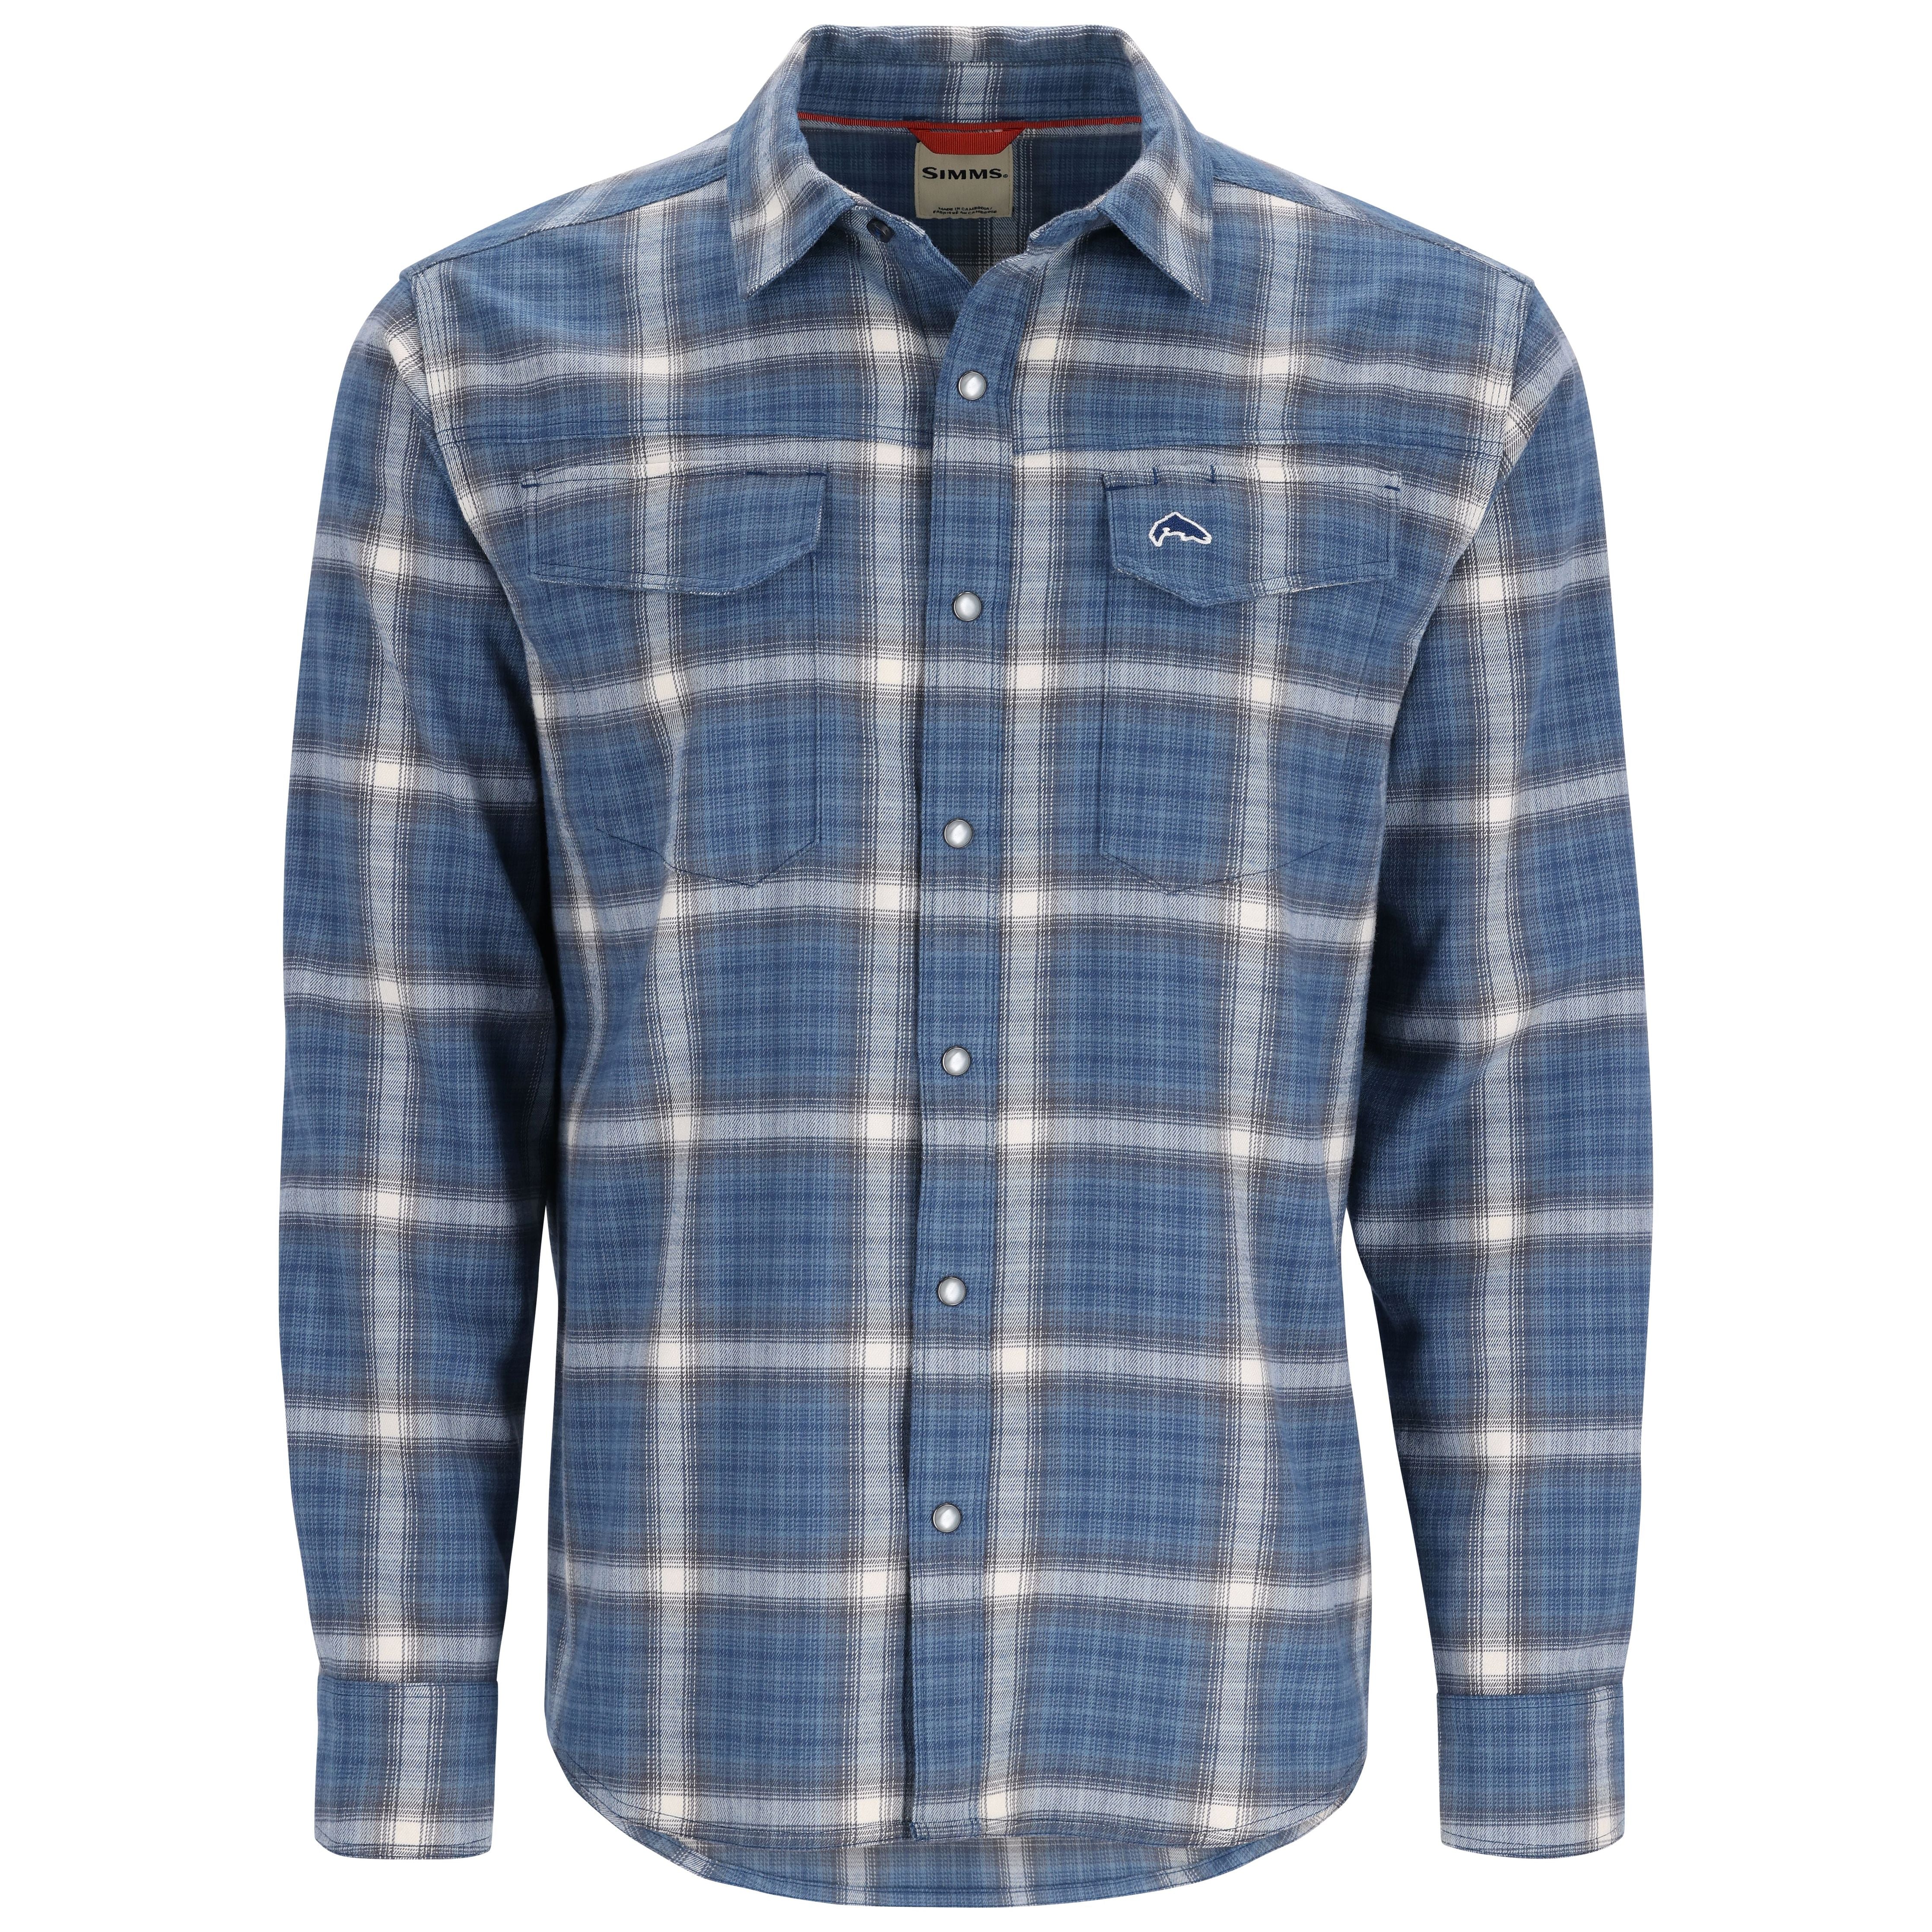 Simms Gallatin Flannel LS Shirt Neptune Ombre Plaid Image 01